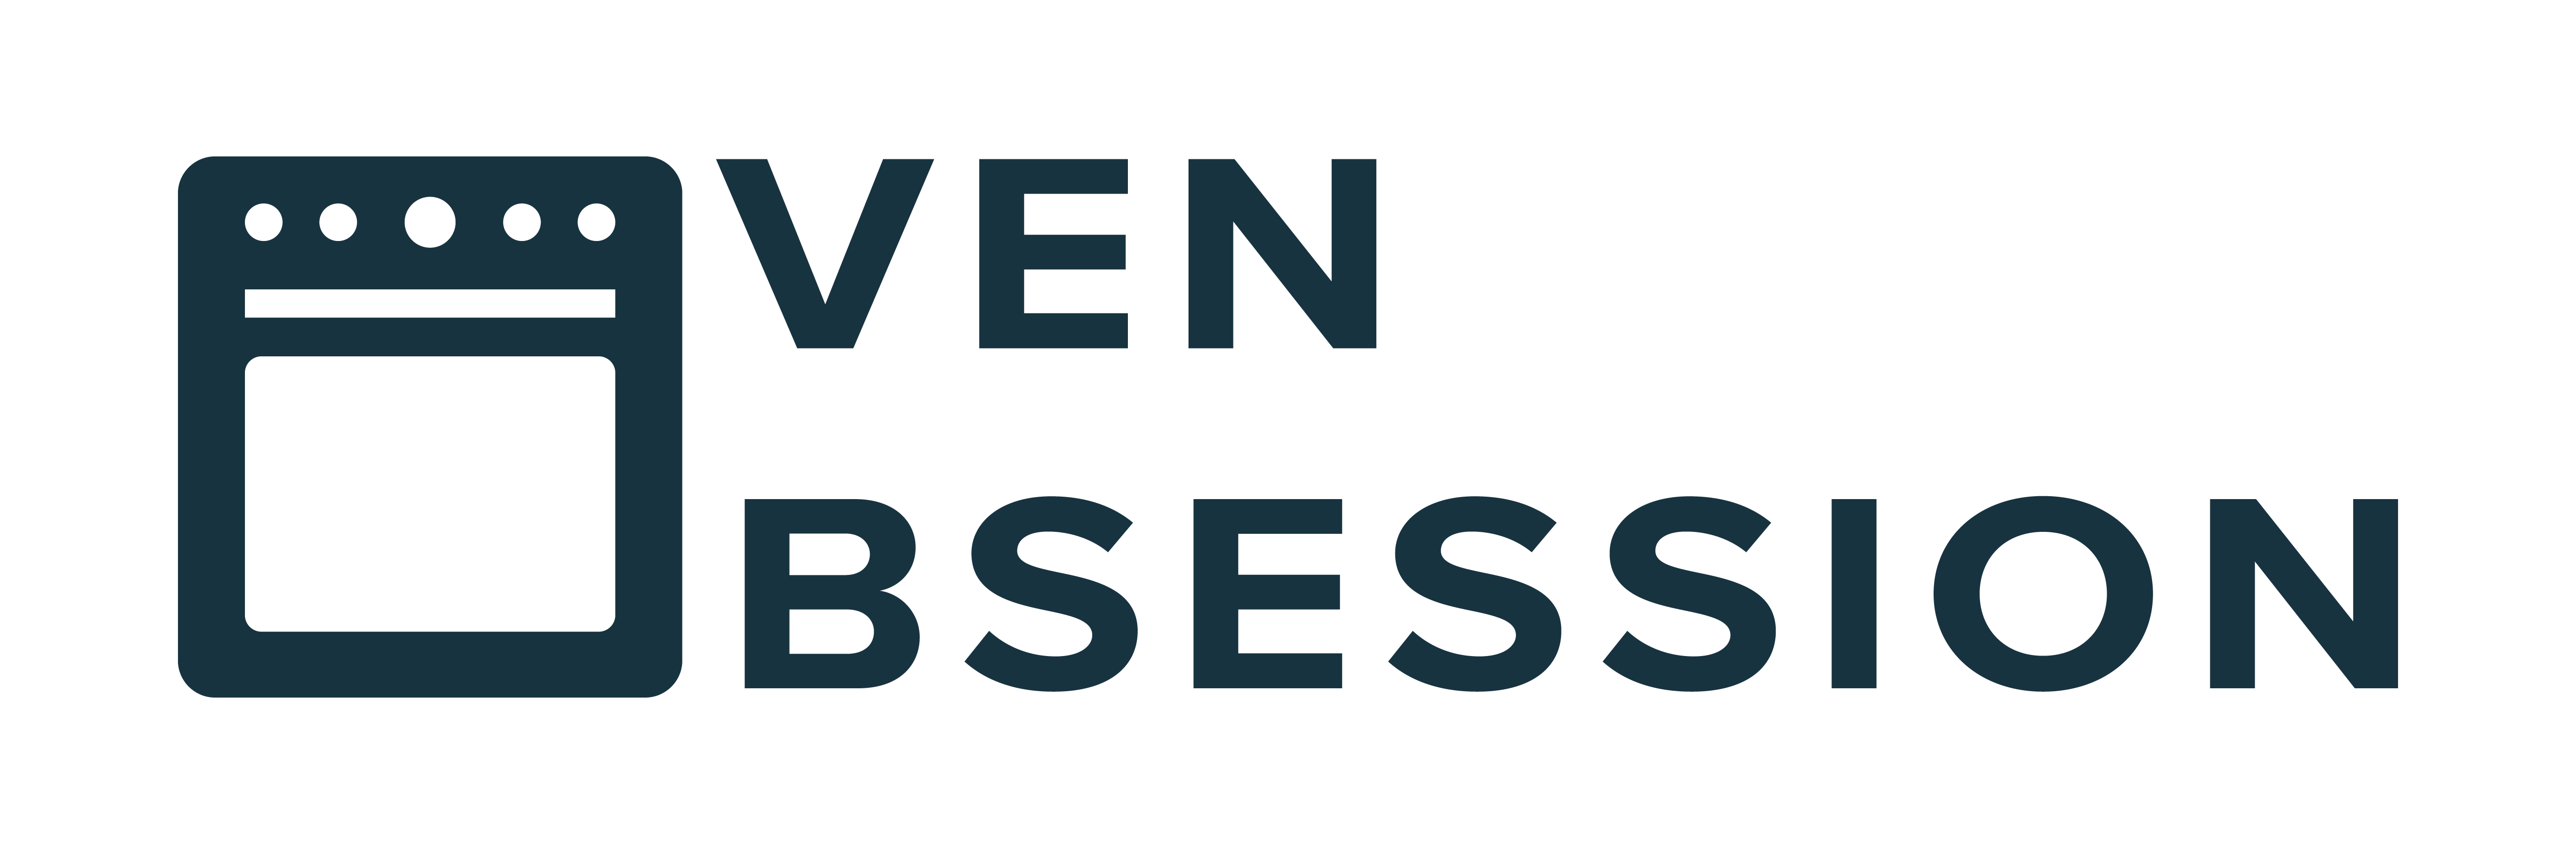 oven obsession logo